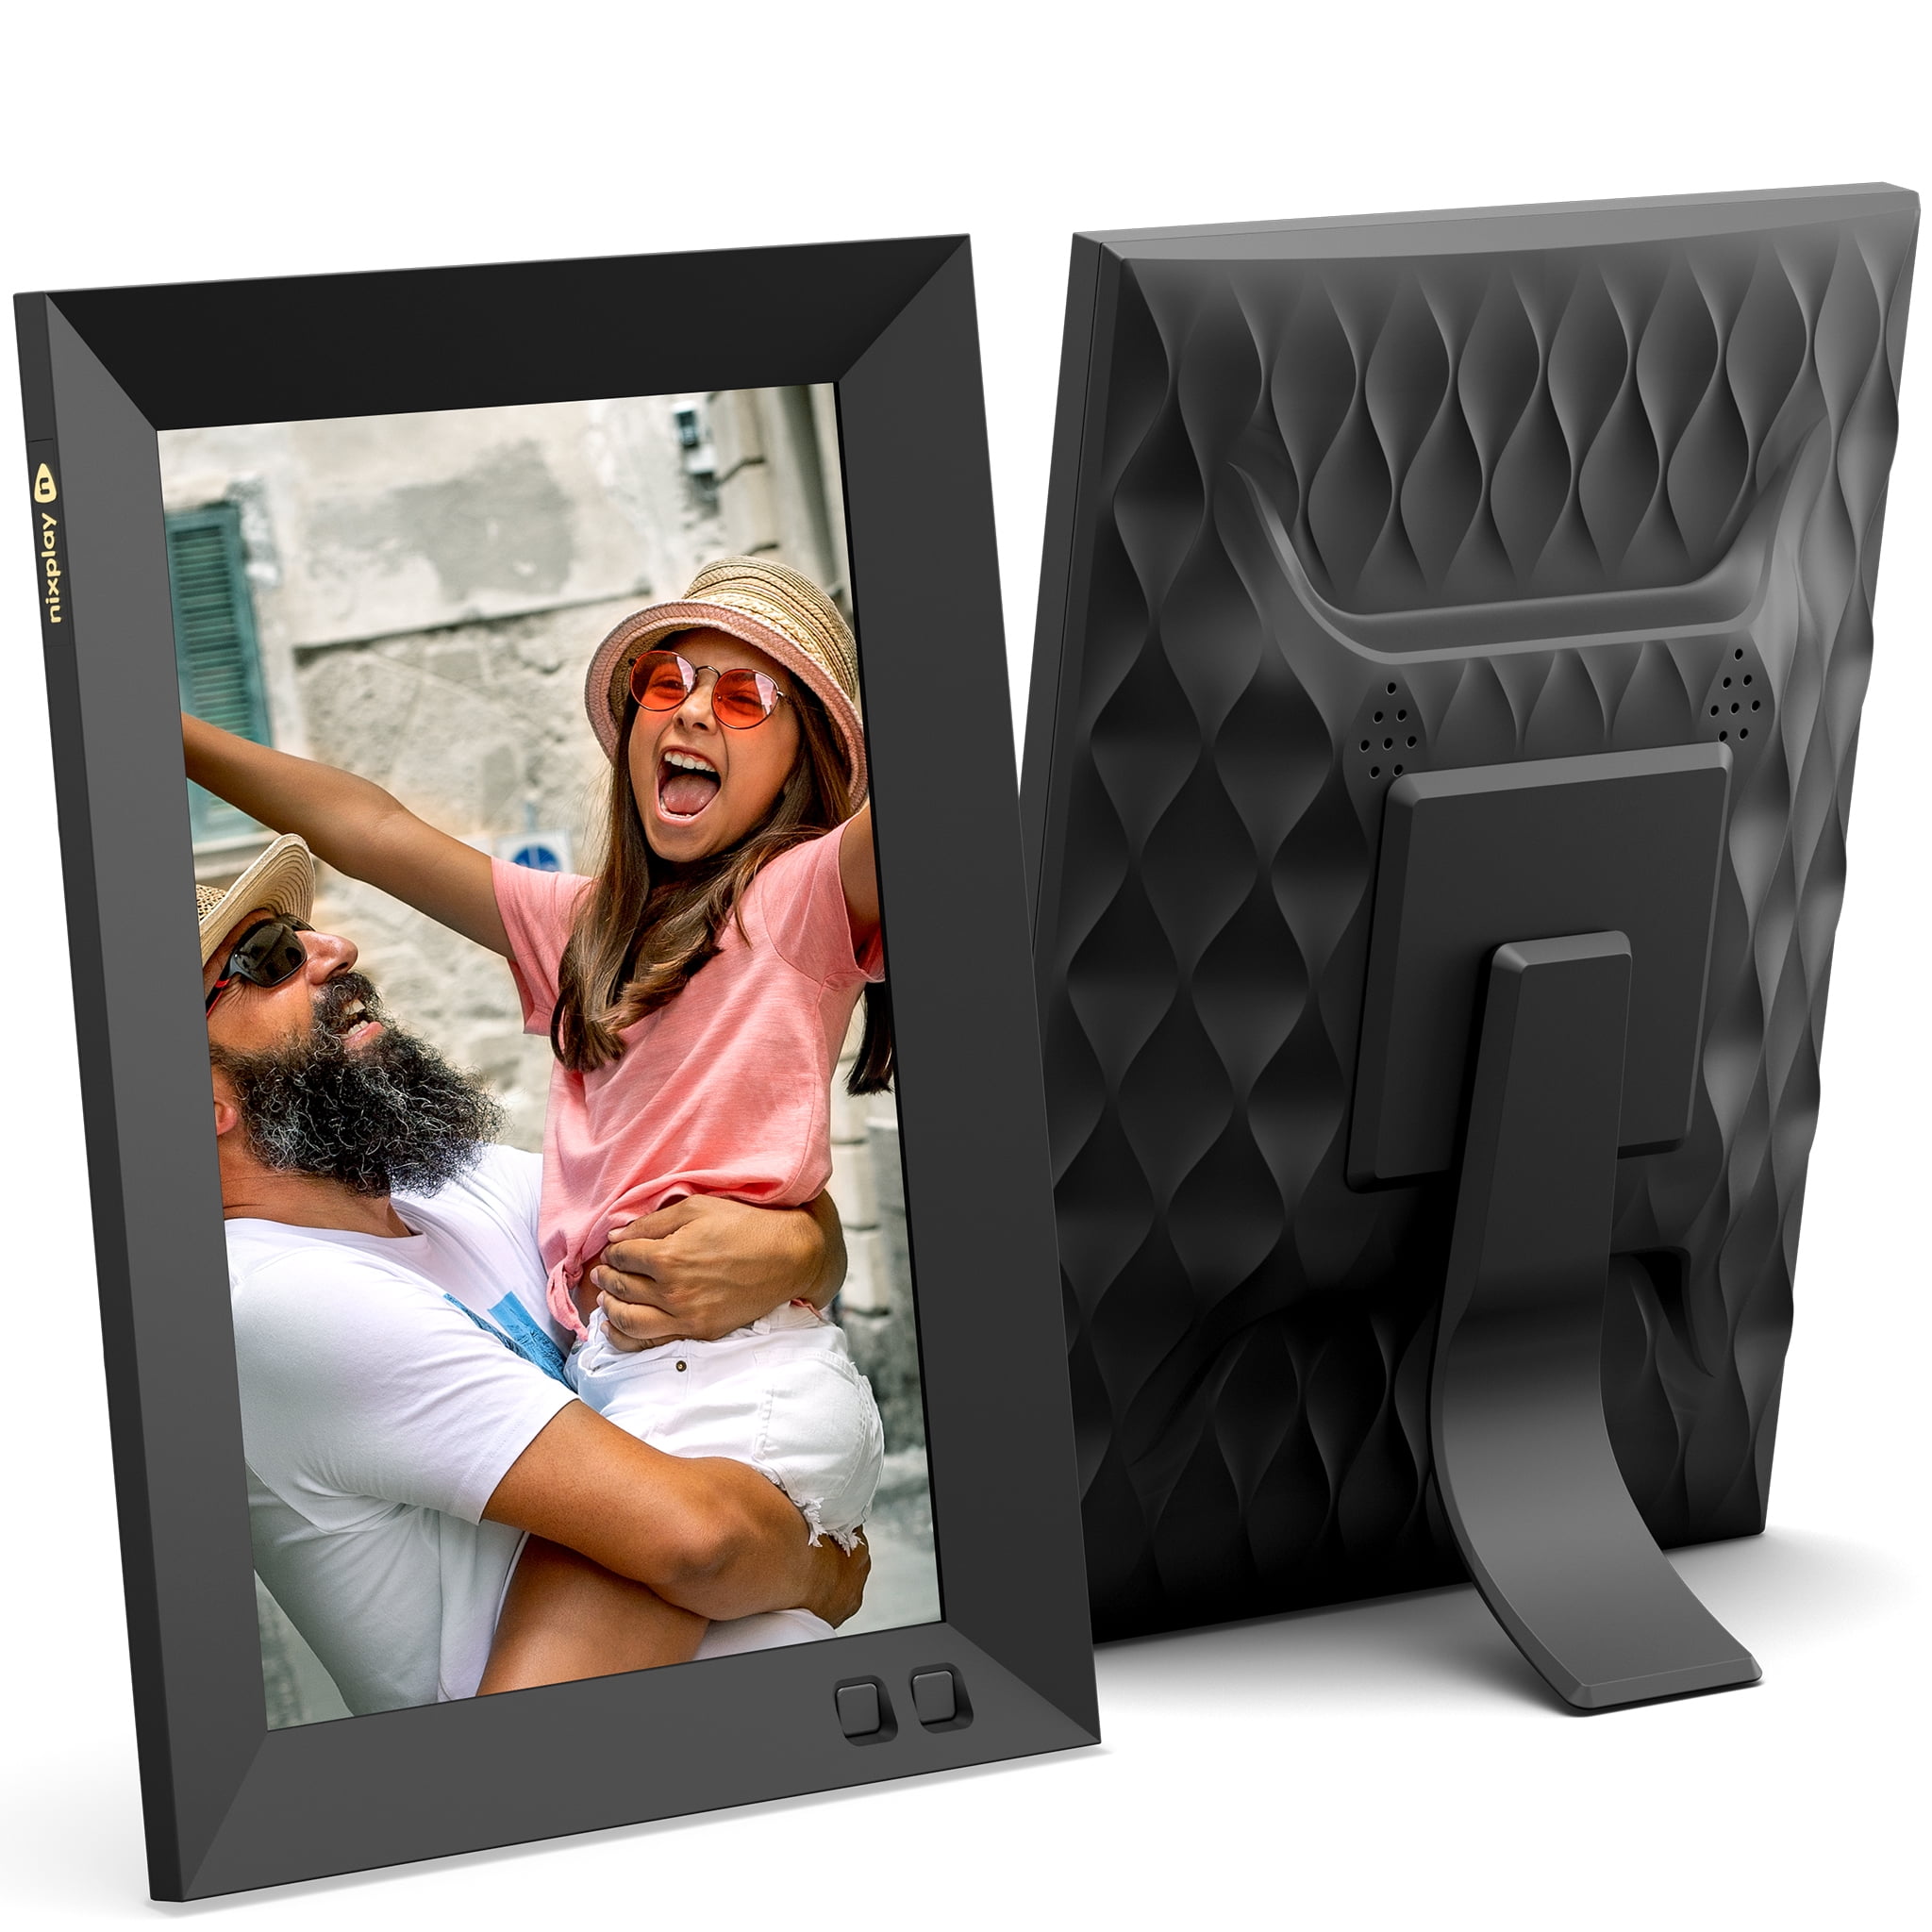 HP 8 Inch Digital Photo Picture Frame for Memory Storage 